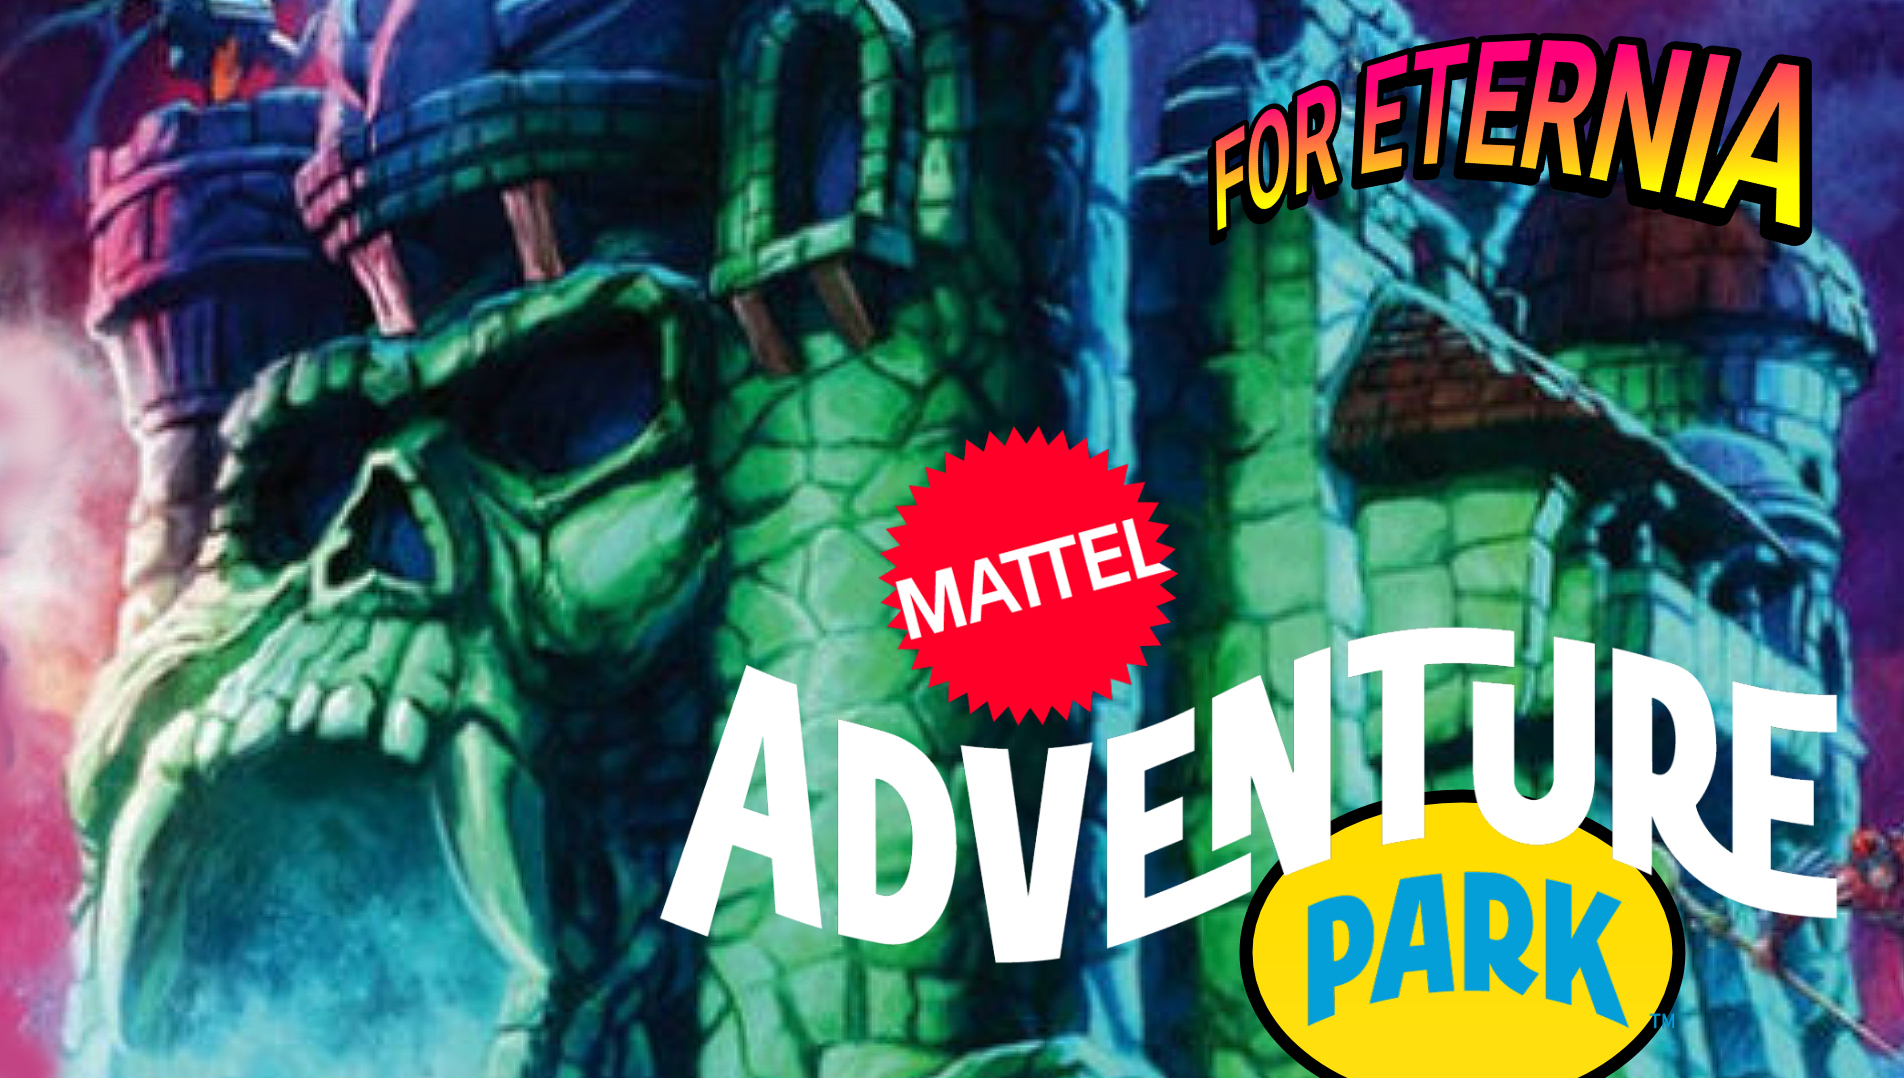 The wait continues: Mattel Adventure Park is now aiming for a 2025 Grand Opening